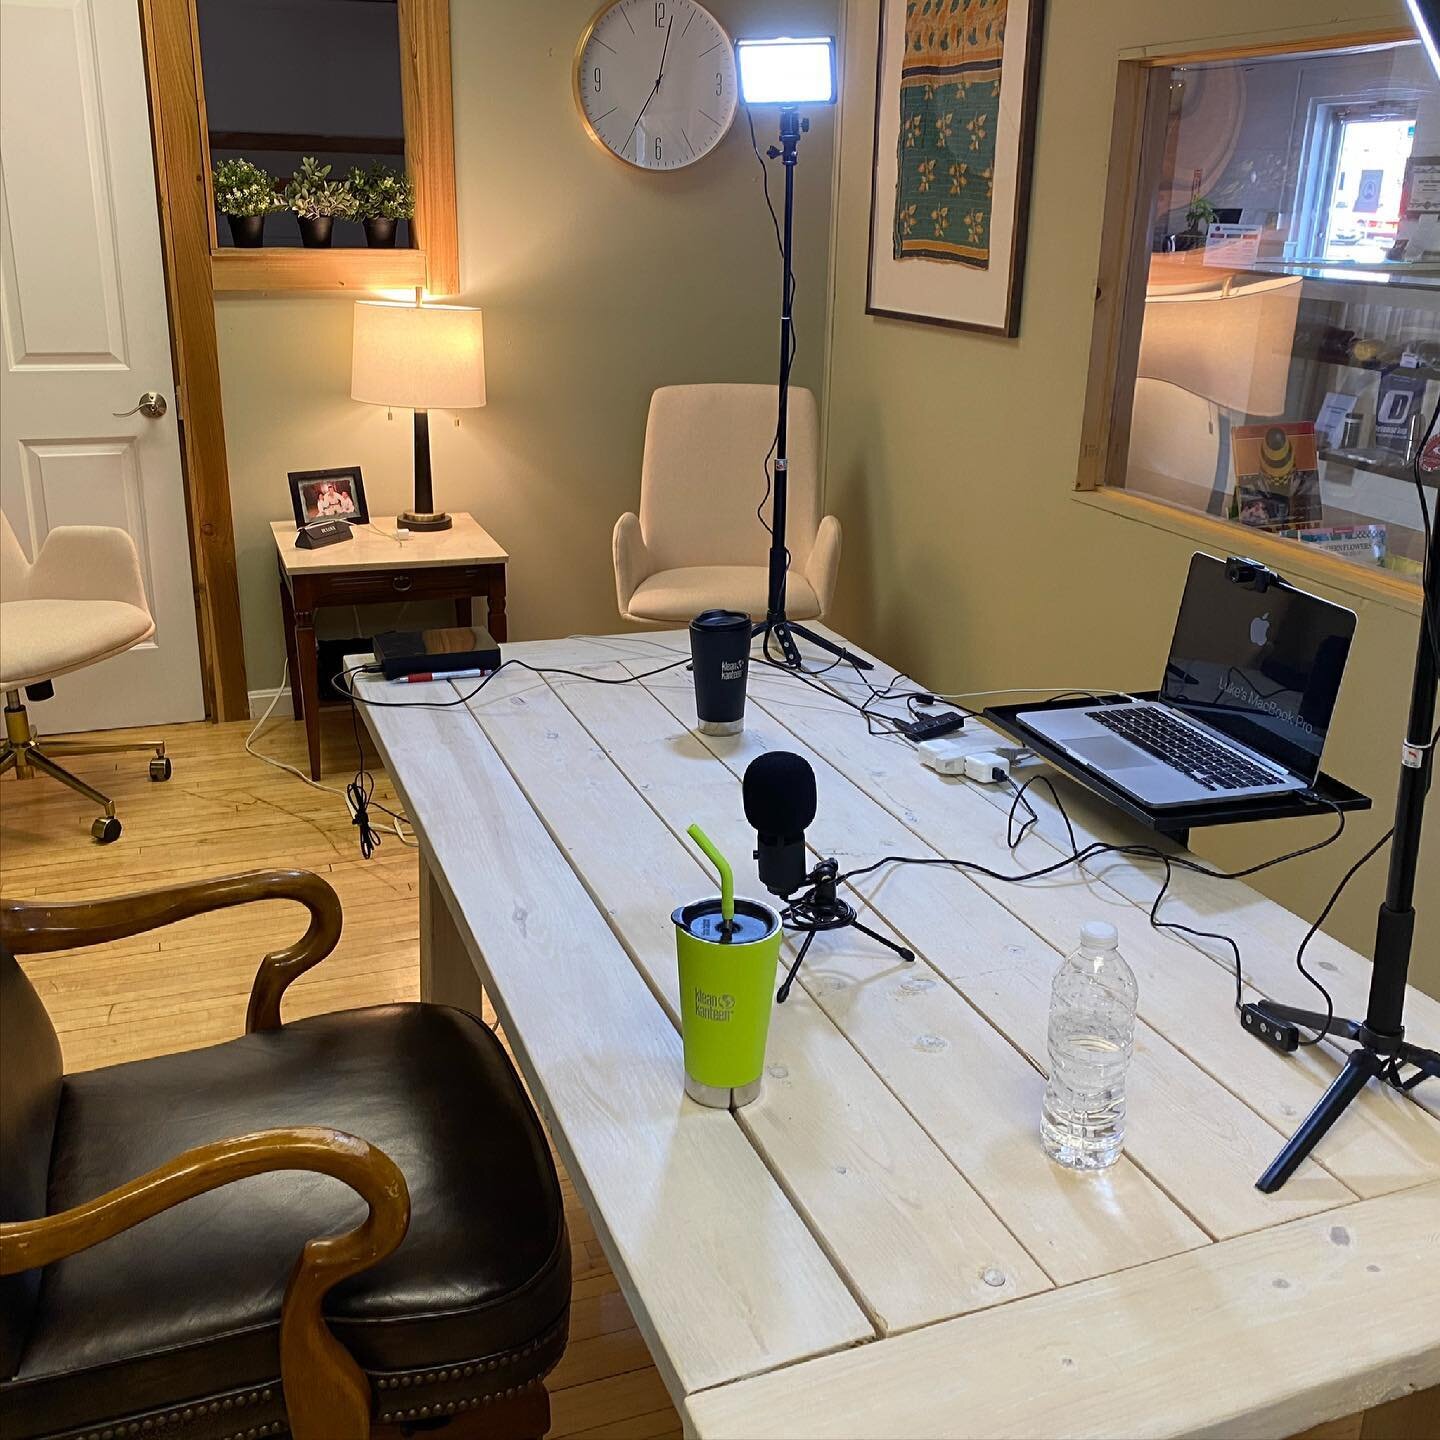 Caty and I Just finished another podcast session😁

&ldquo;Our goal is your empowerment through increased awareness, confidence and clarity.&rdquo;
Visit: wellspringcoachingservices.com

#personalgrowth #lifecoach #awareness #confidence #clarity #wel